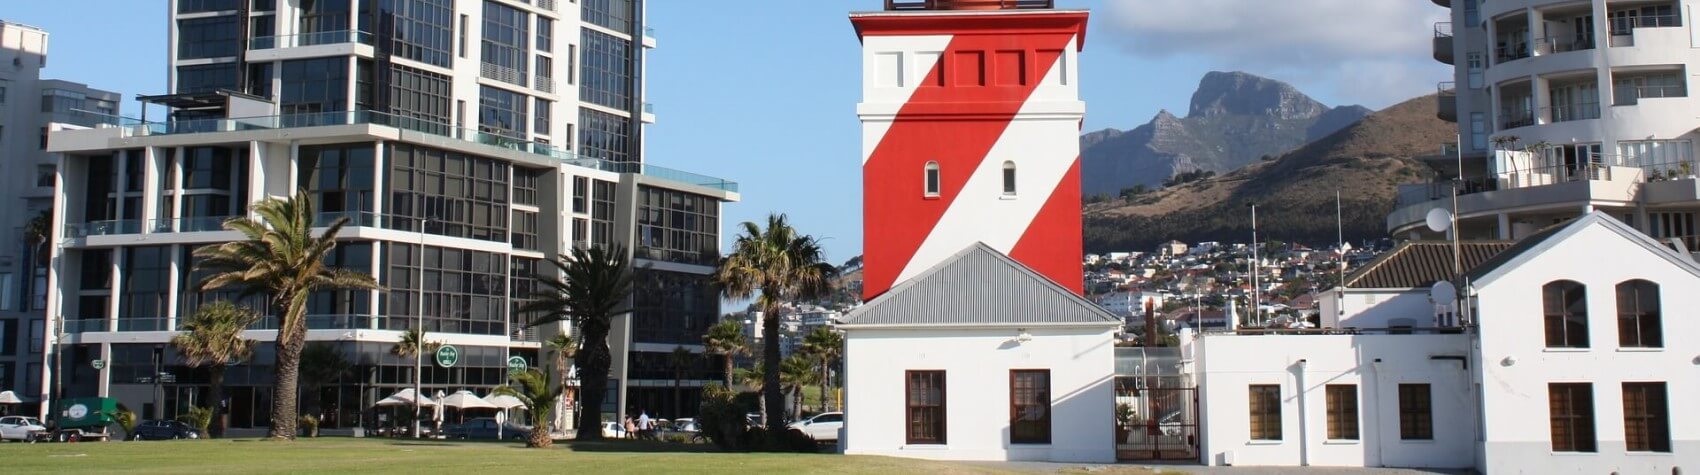 8 Things to do for a weekend stay in Sea Point